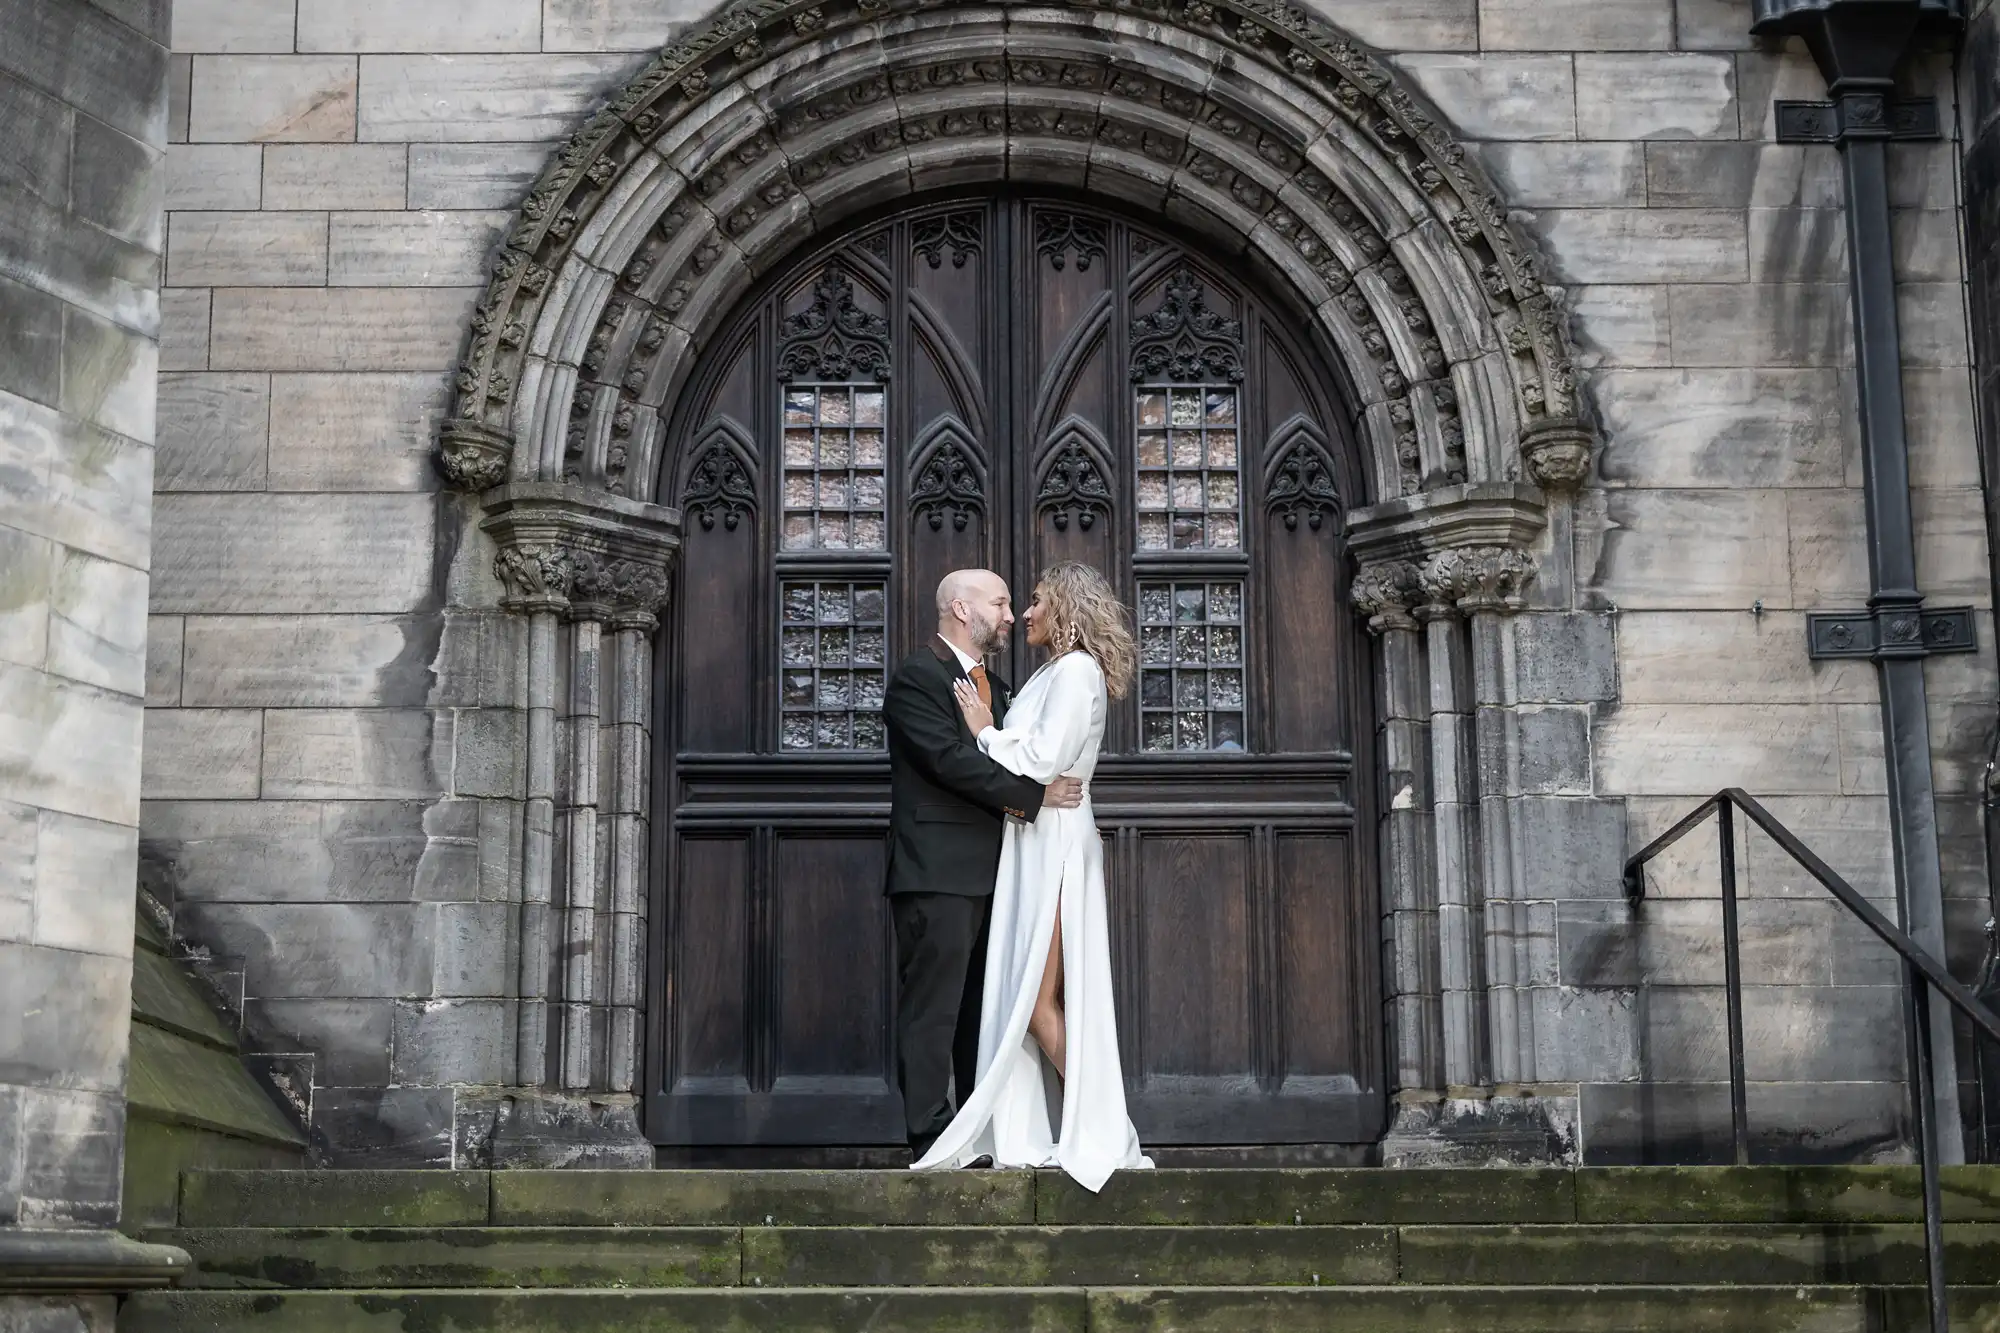 A couple stands closely, looking at one another in front of a large, ornate wooden door with stone arch detailing. The man wears a black suit, and the woman wears a white dress with a slit.